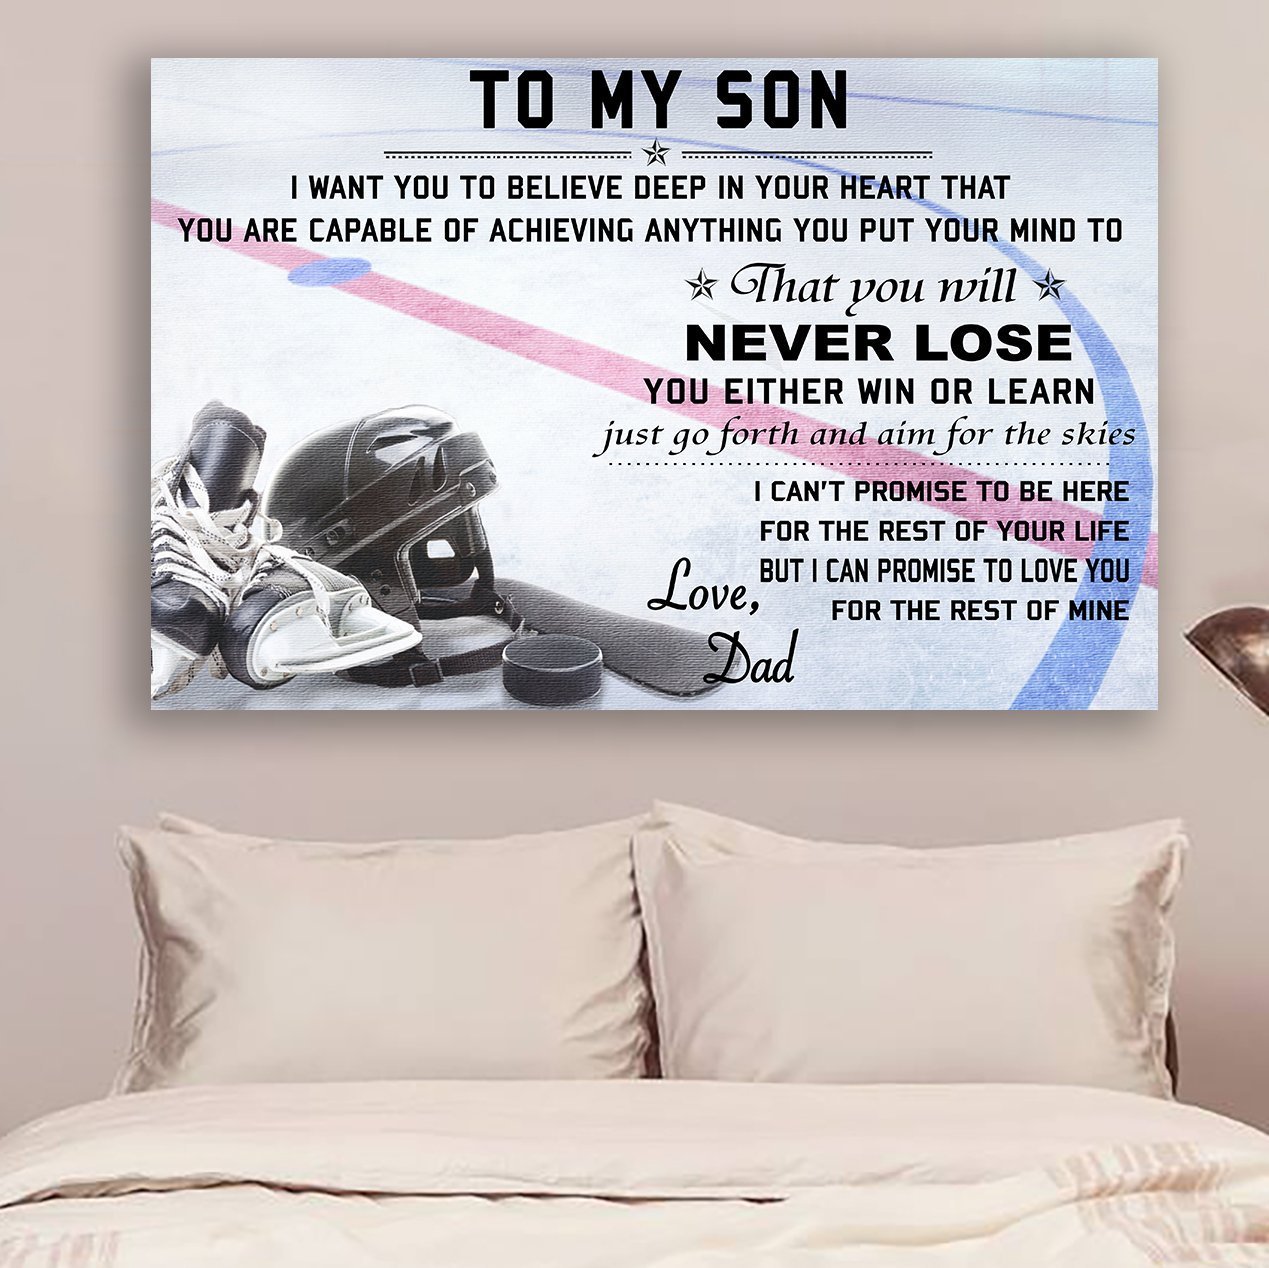 hockey Canvas and Poster ��� Dad to son ��� never lose wall decor visual art - GIFTCUSTOM